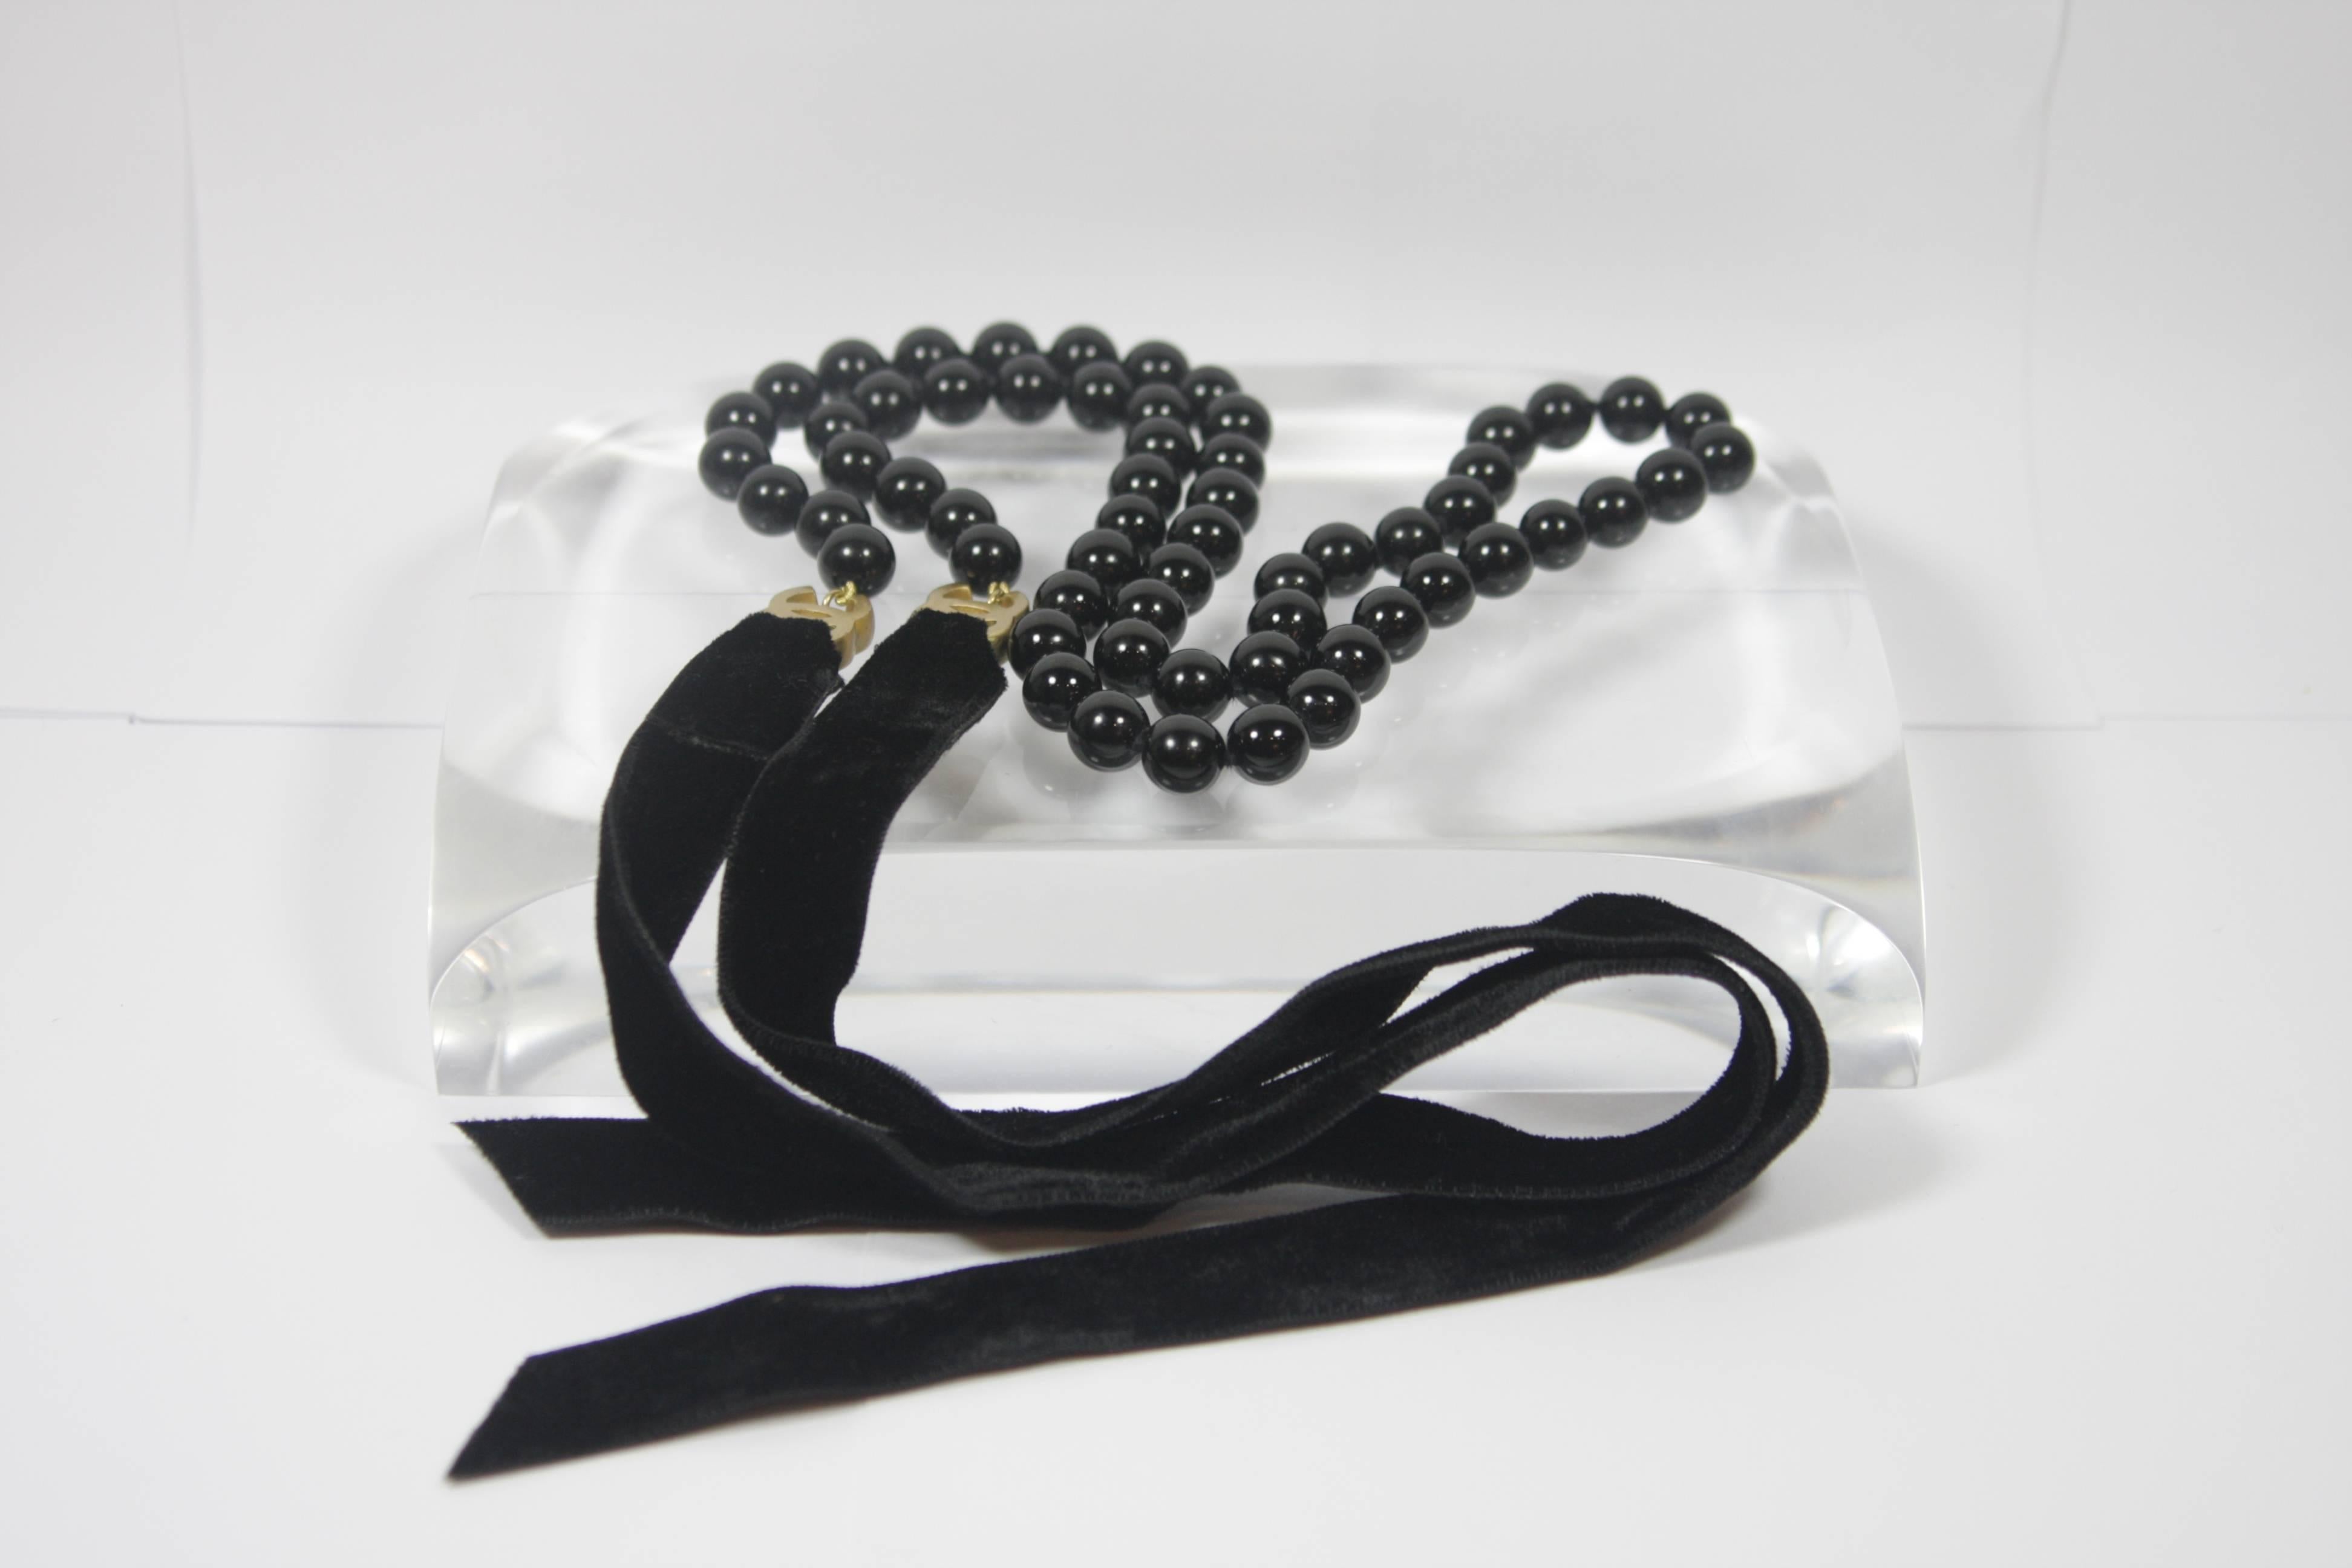 CHANEL Black Bead Necklace or Belt with Velvet Ties and Gold Tone Hardware 2